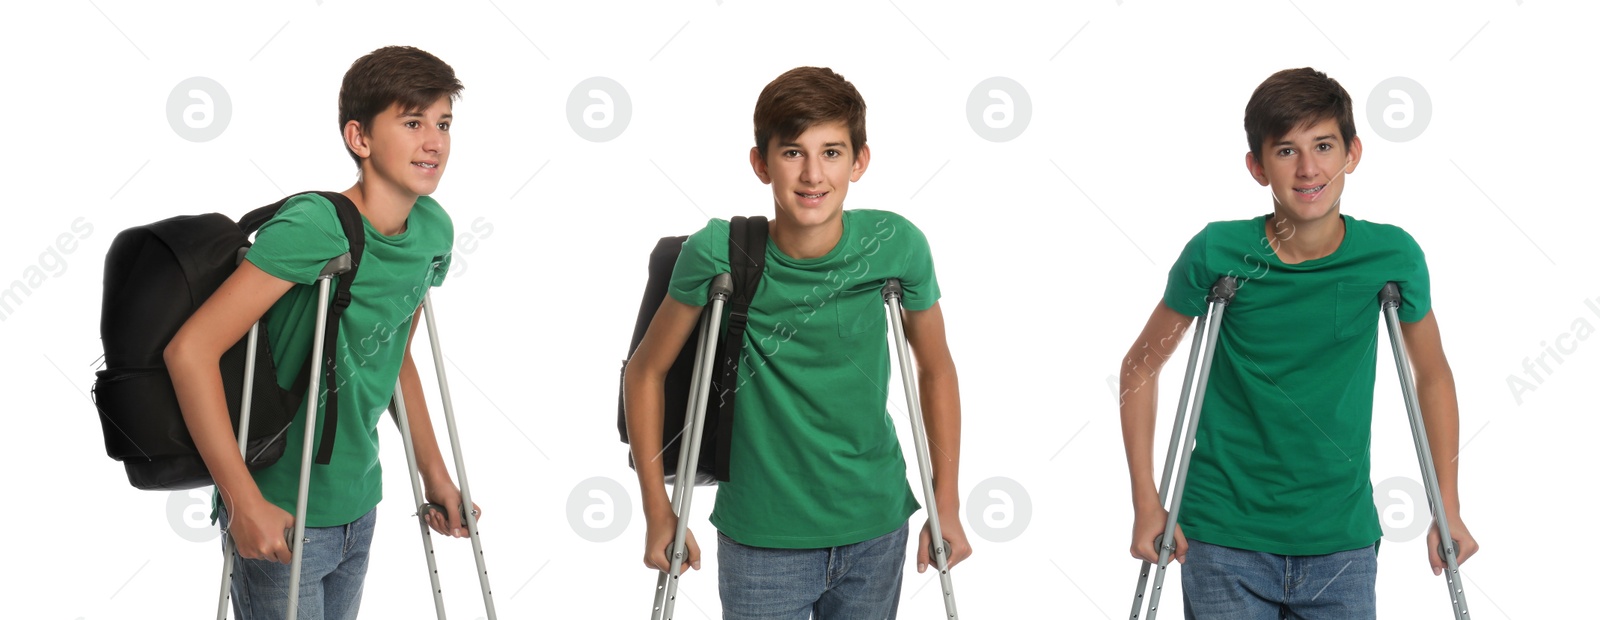 Image of Teenage boy with axillary crutches on white background, collage. Banner design